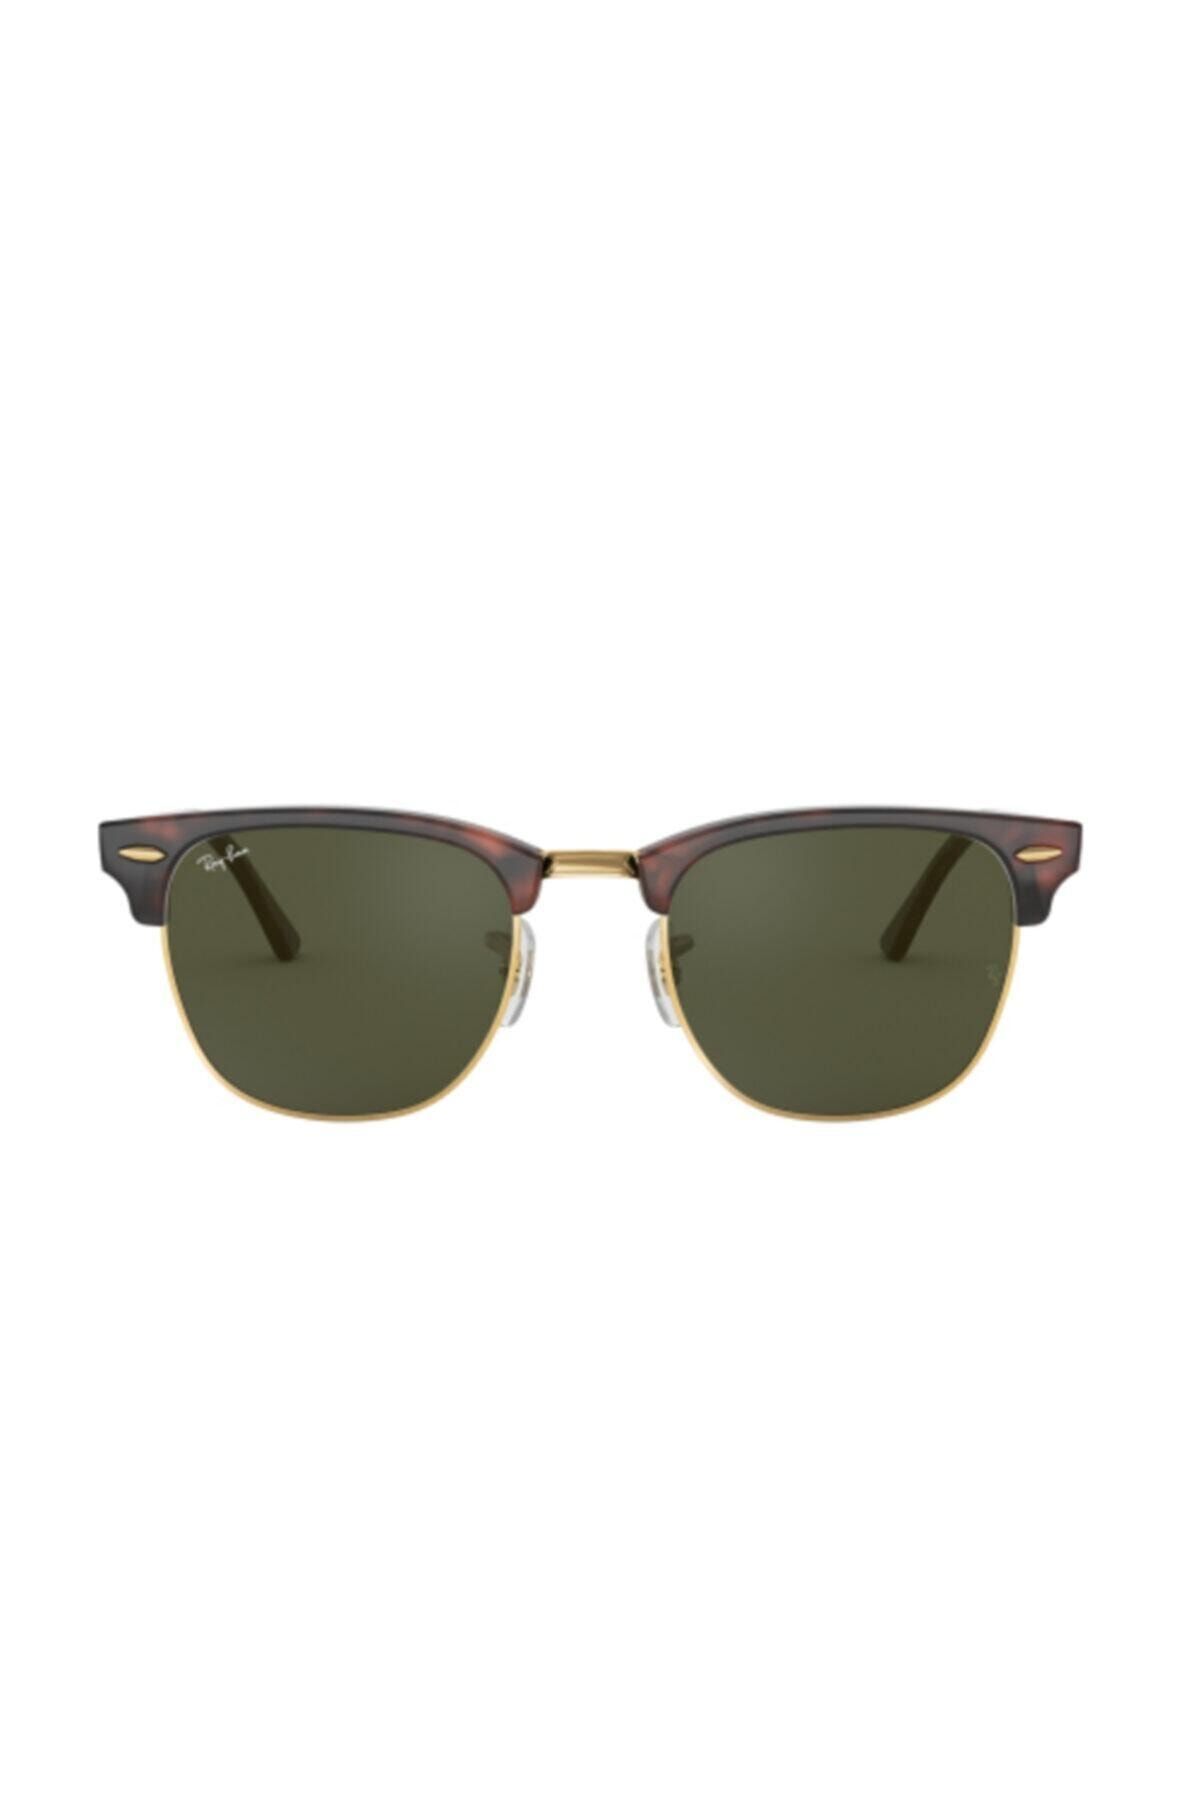 Ray-Ban Rb3016 W0366 51